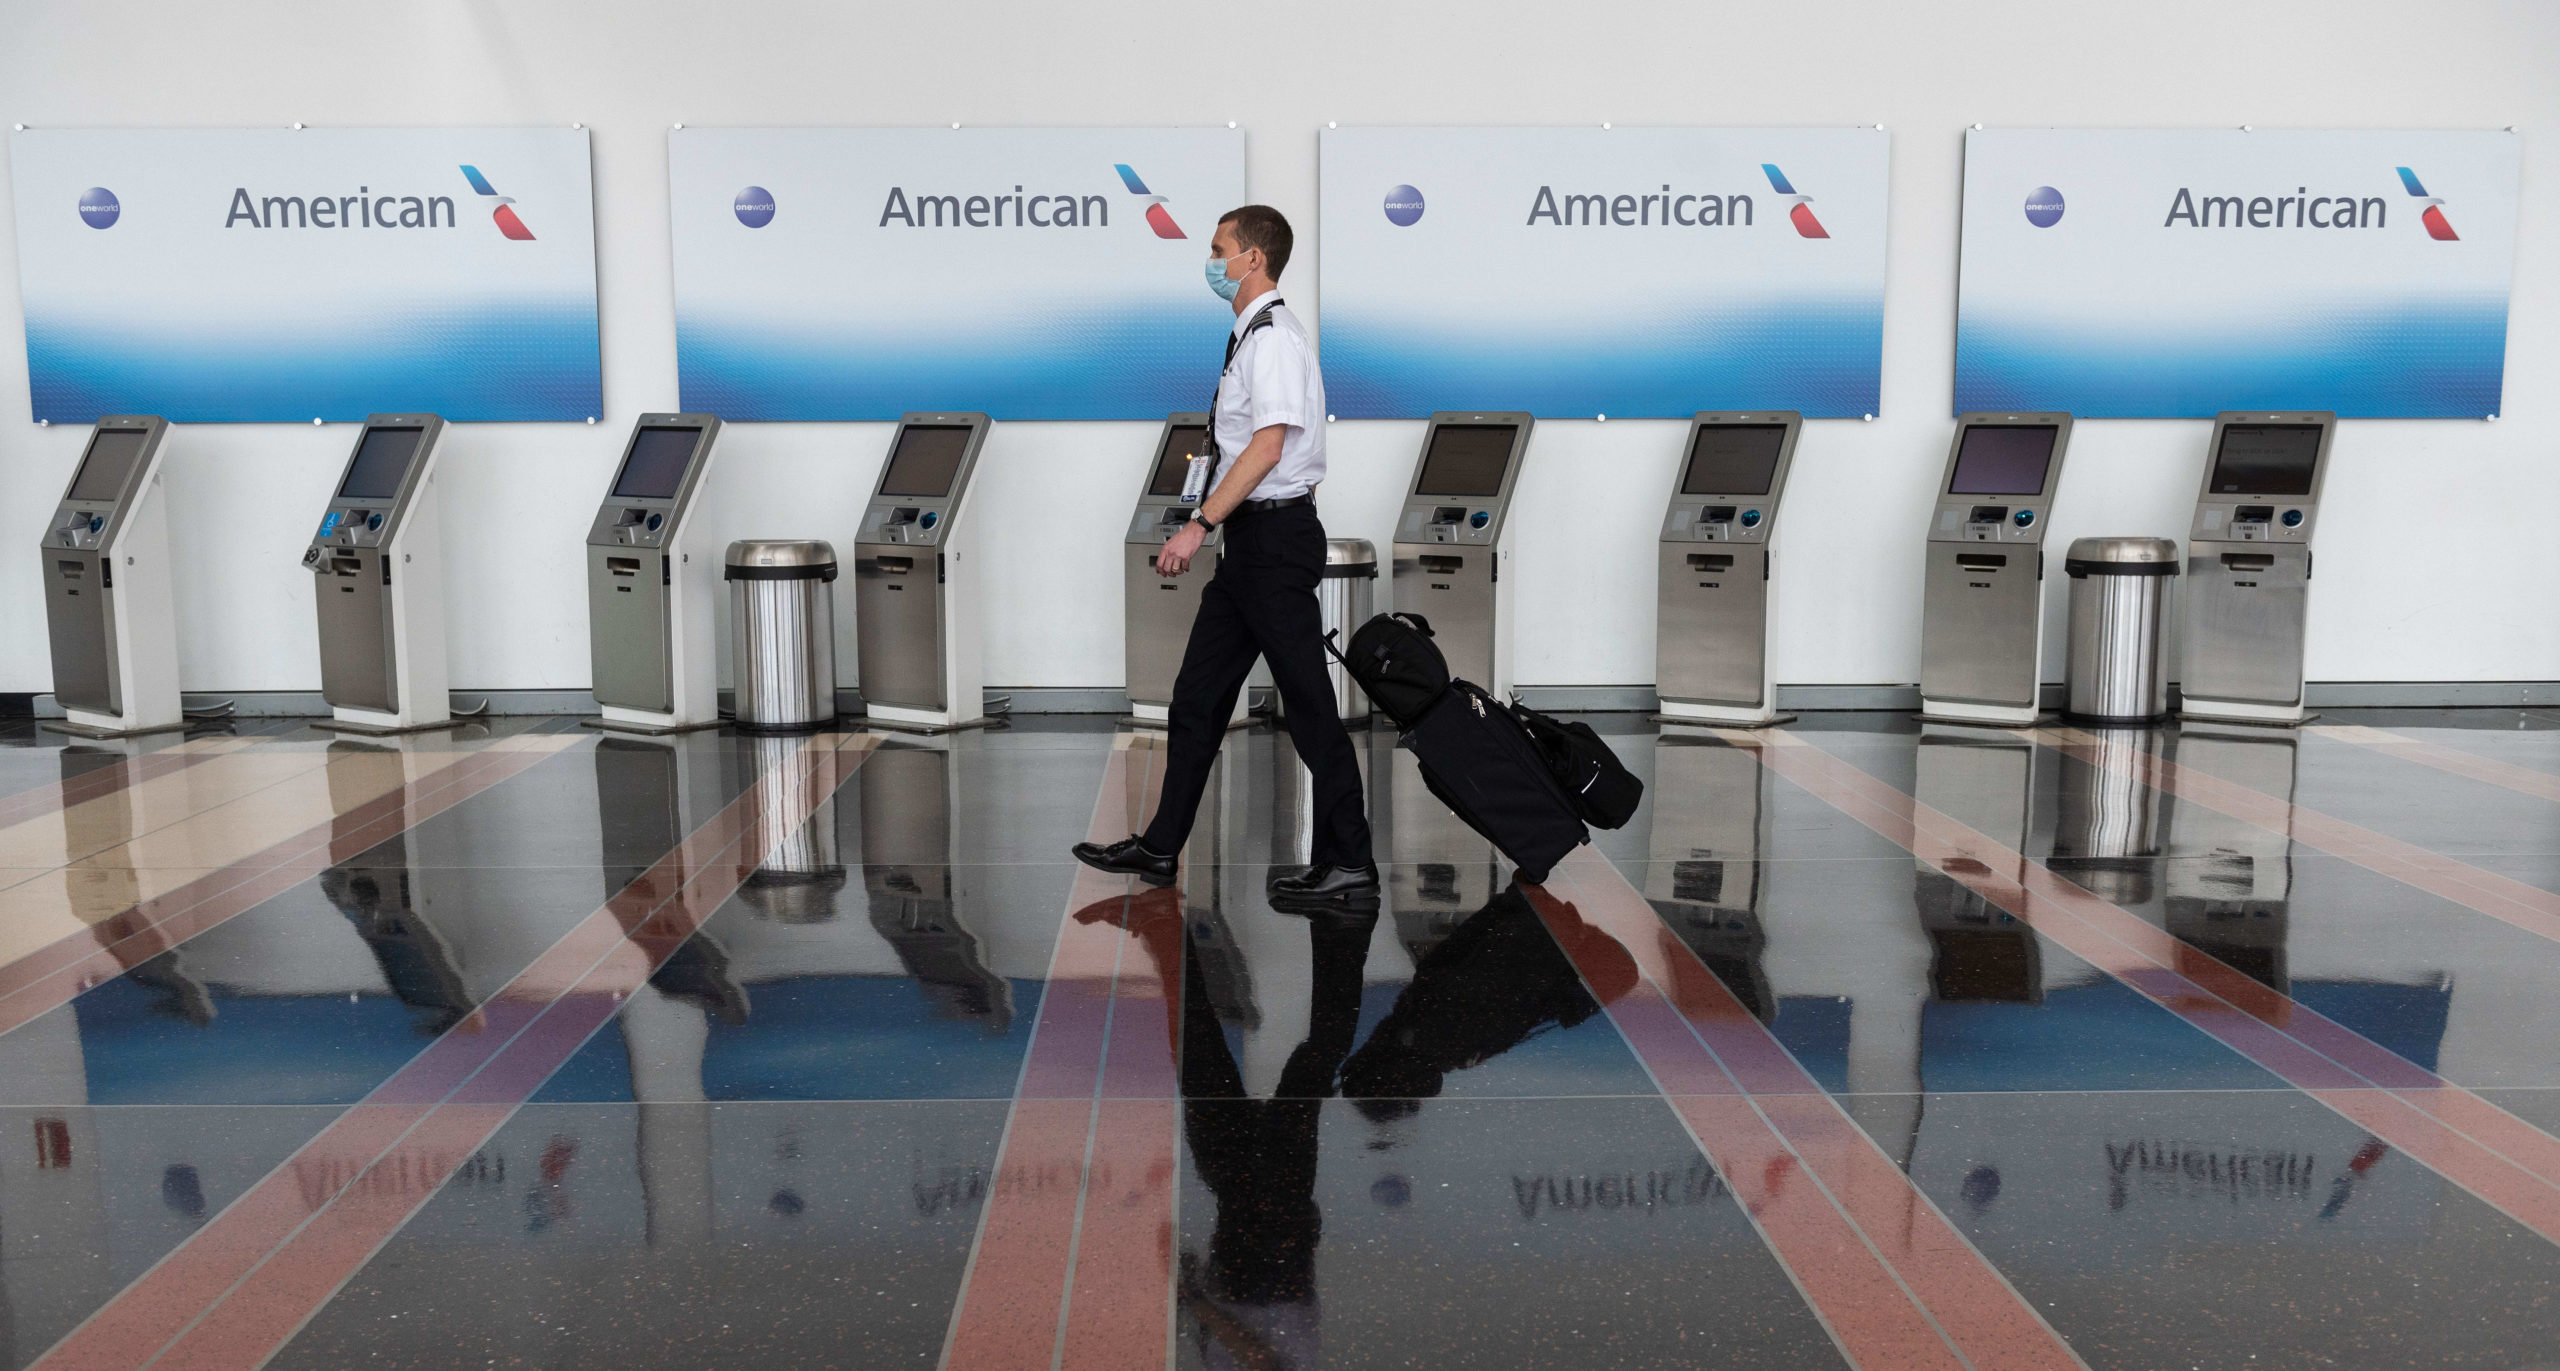 American Airways gives severance packages to high-level executives